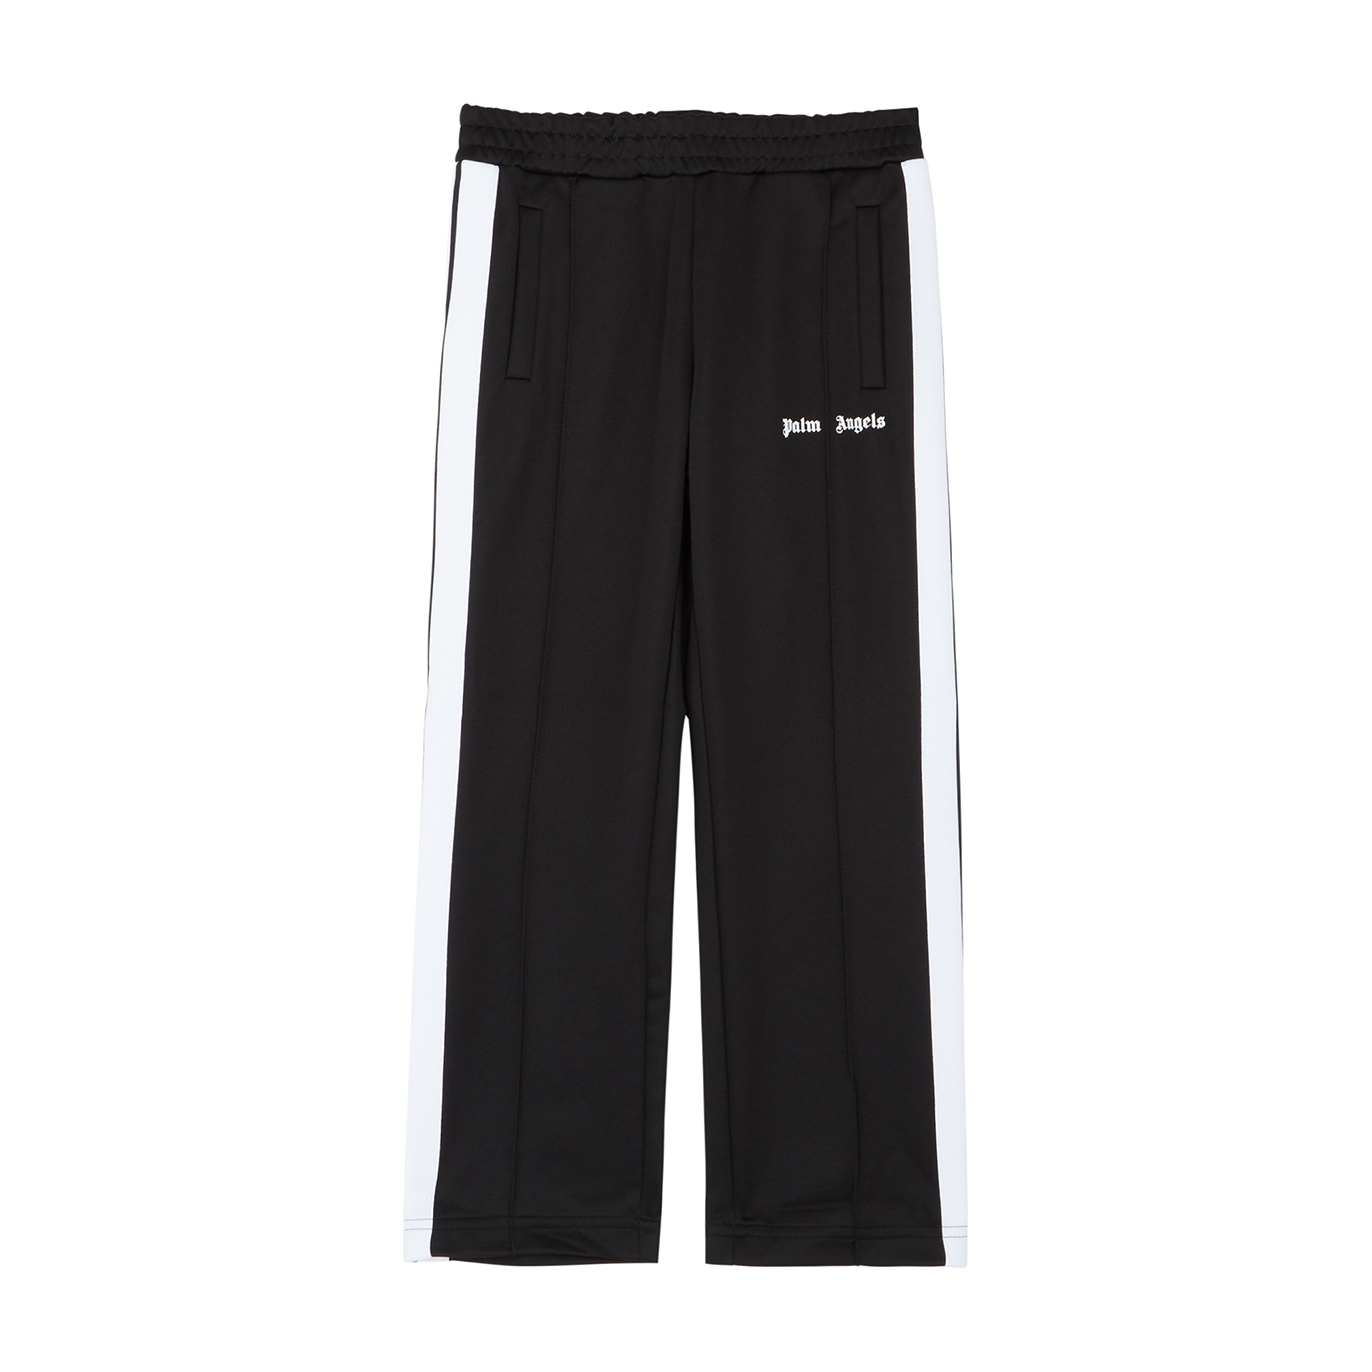 Palm Angels Kids Black Striped Jersey Track Pants (4-10 Years) - 6 Years